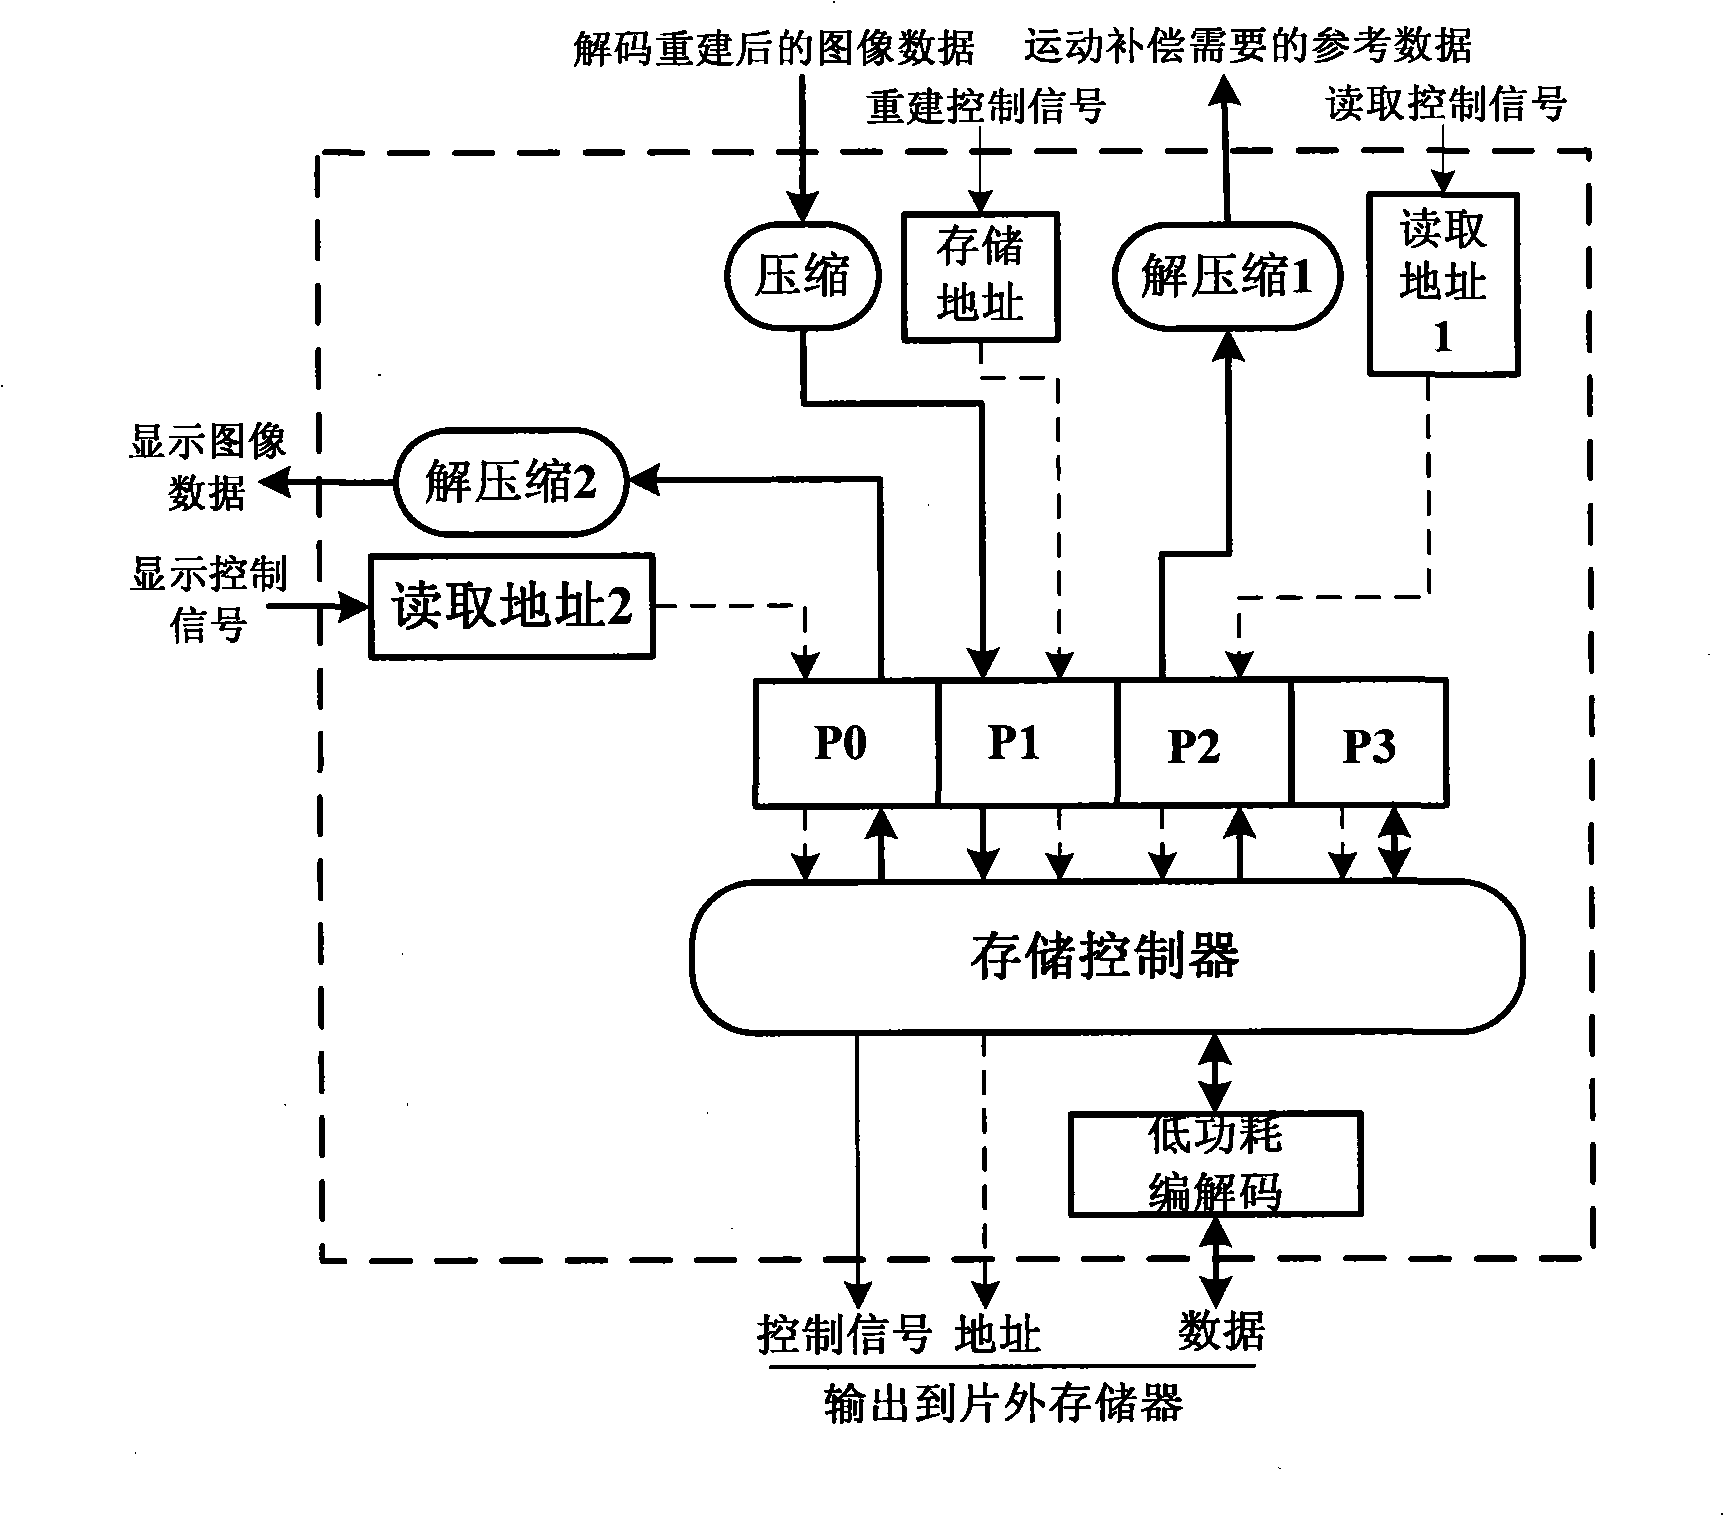 Storing system of integrated video decoder